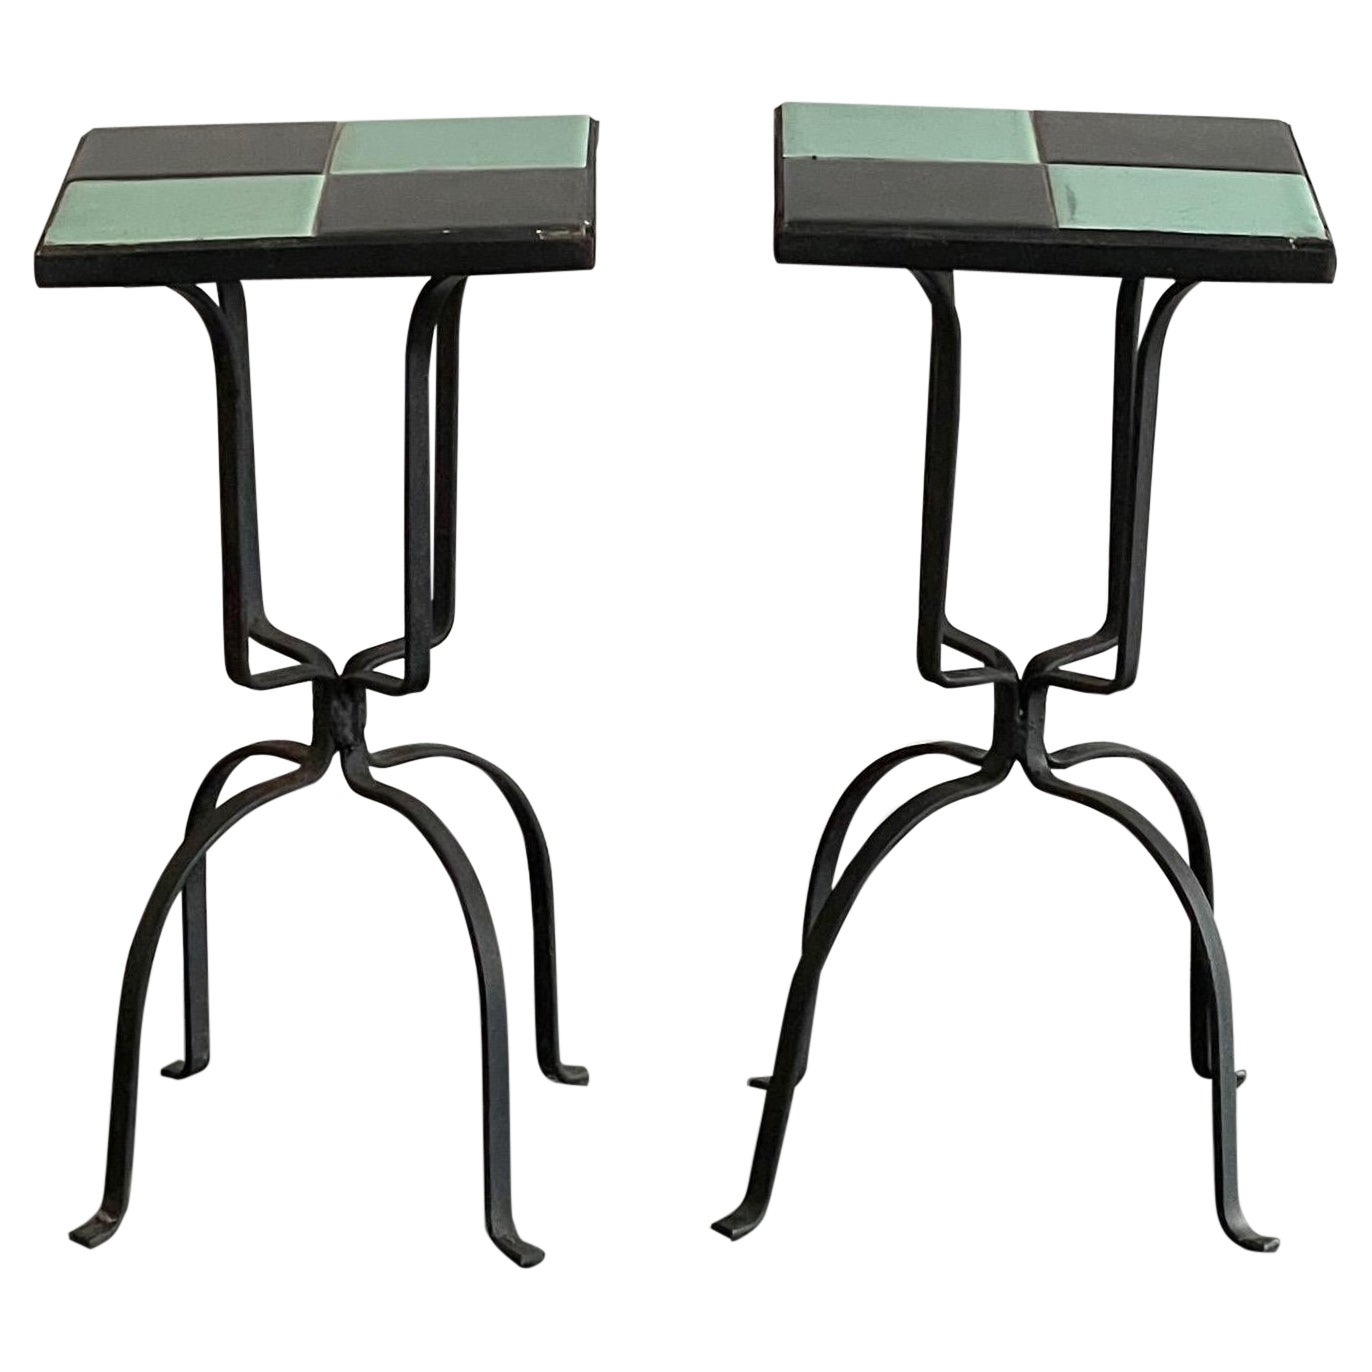 Pair of Wrought Iron and Tile Tables